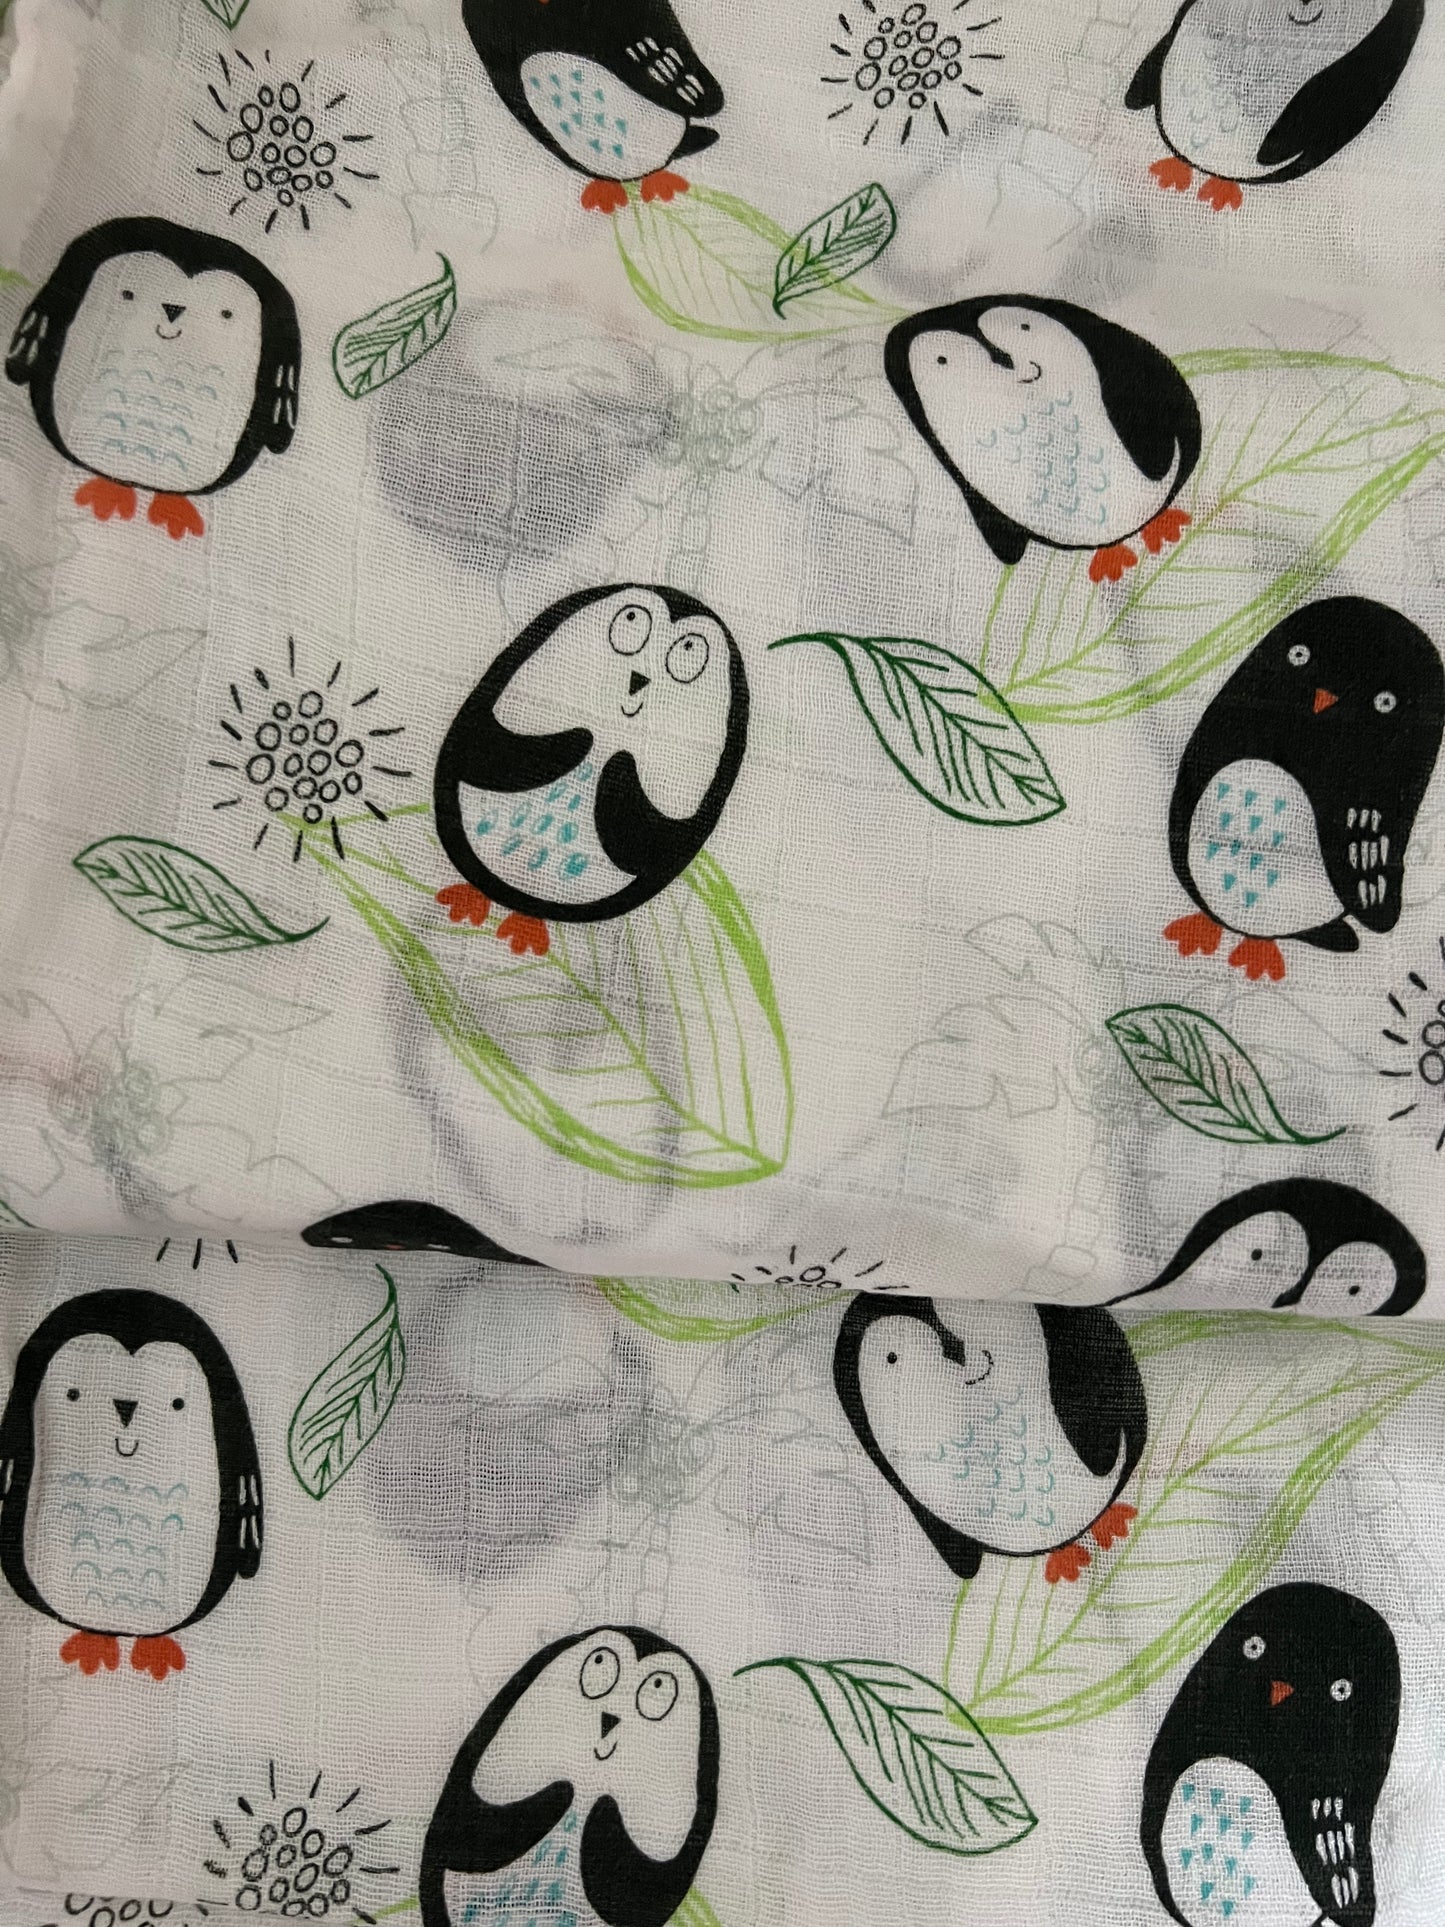 Pip & Percy penguin bamboo cotton swaddle